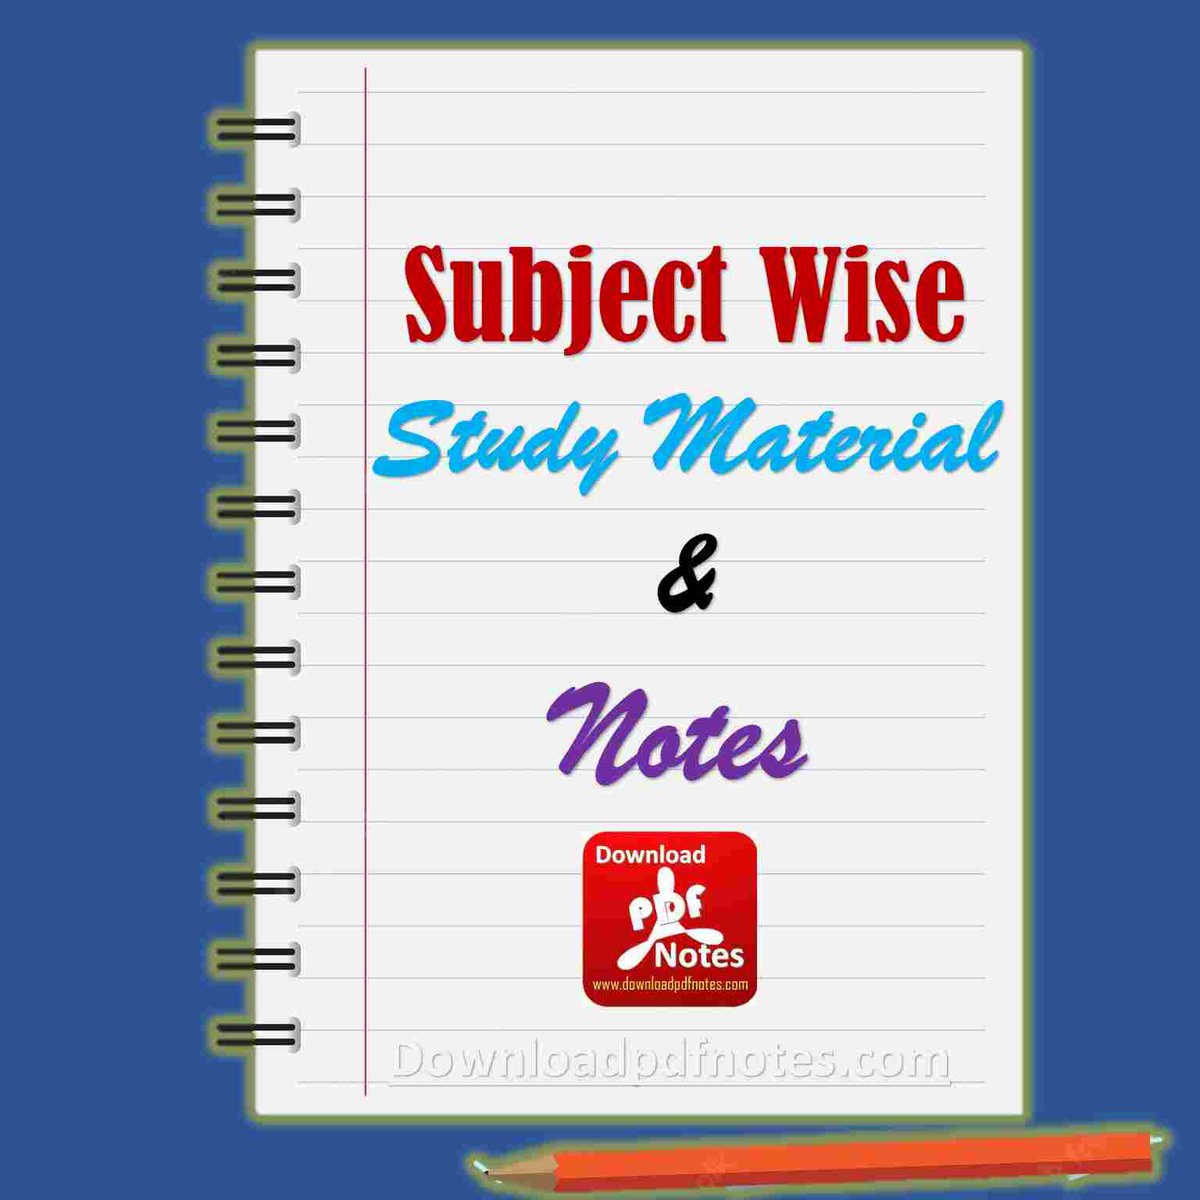 Subject Wise Study material pdf